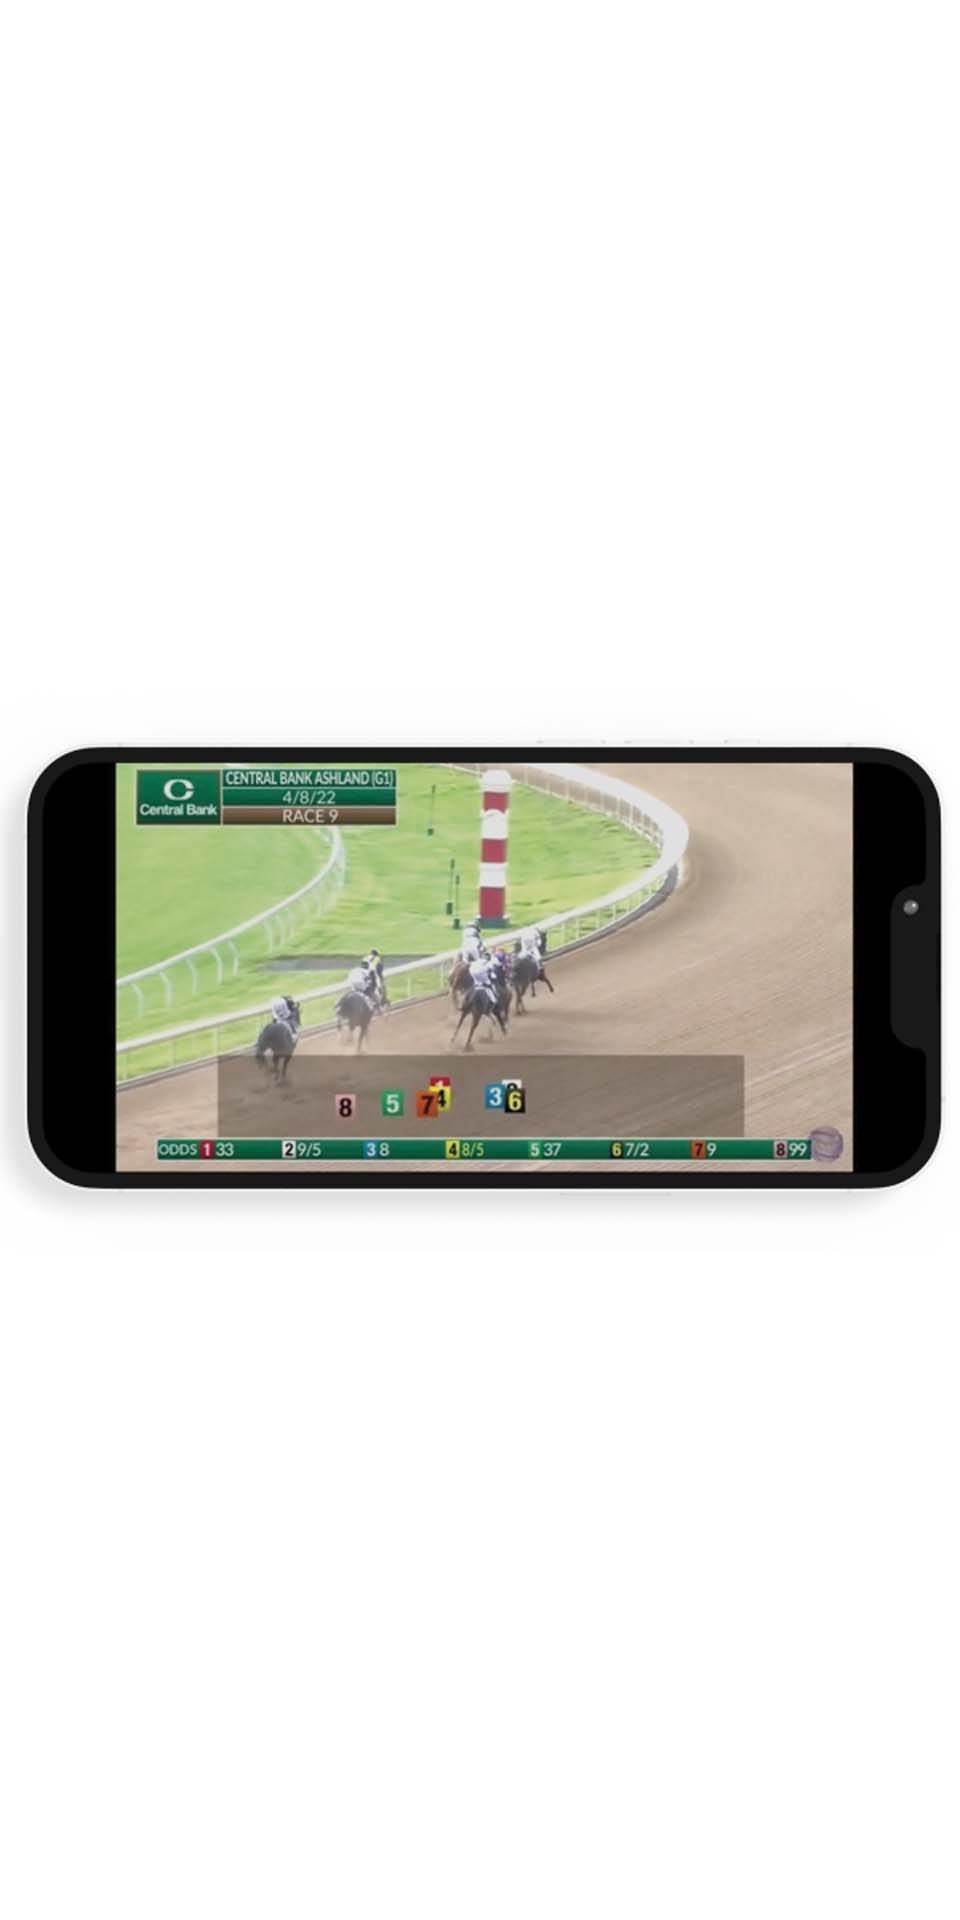 A screenshot from a Live Video on the Keeneland Race Day App